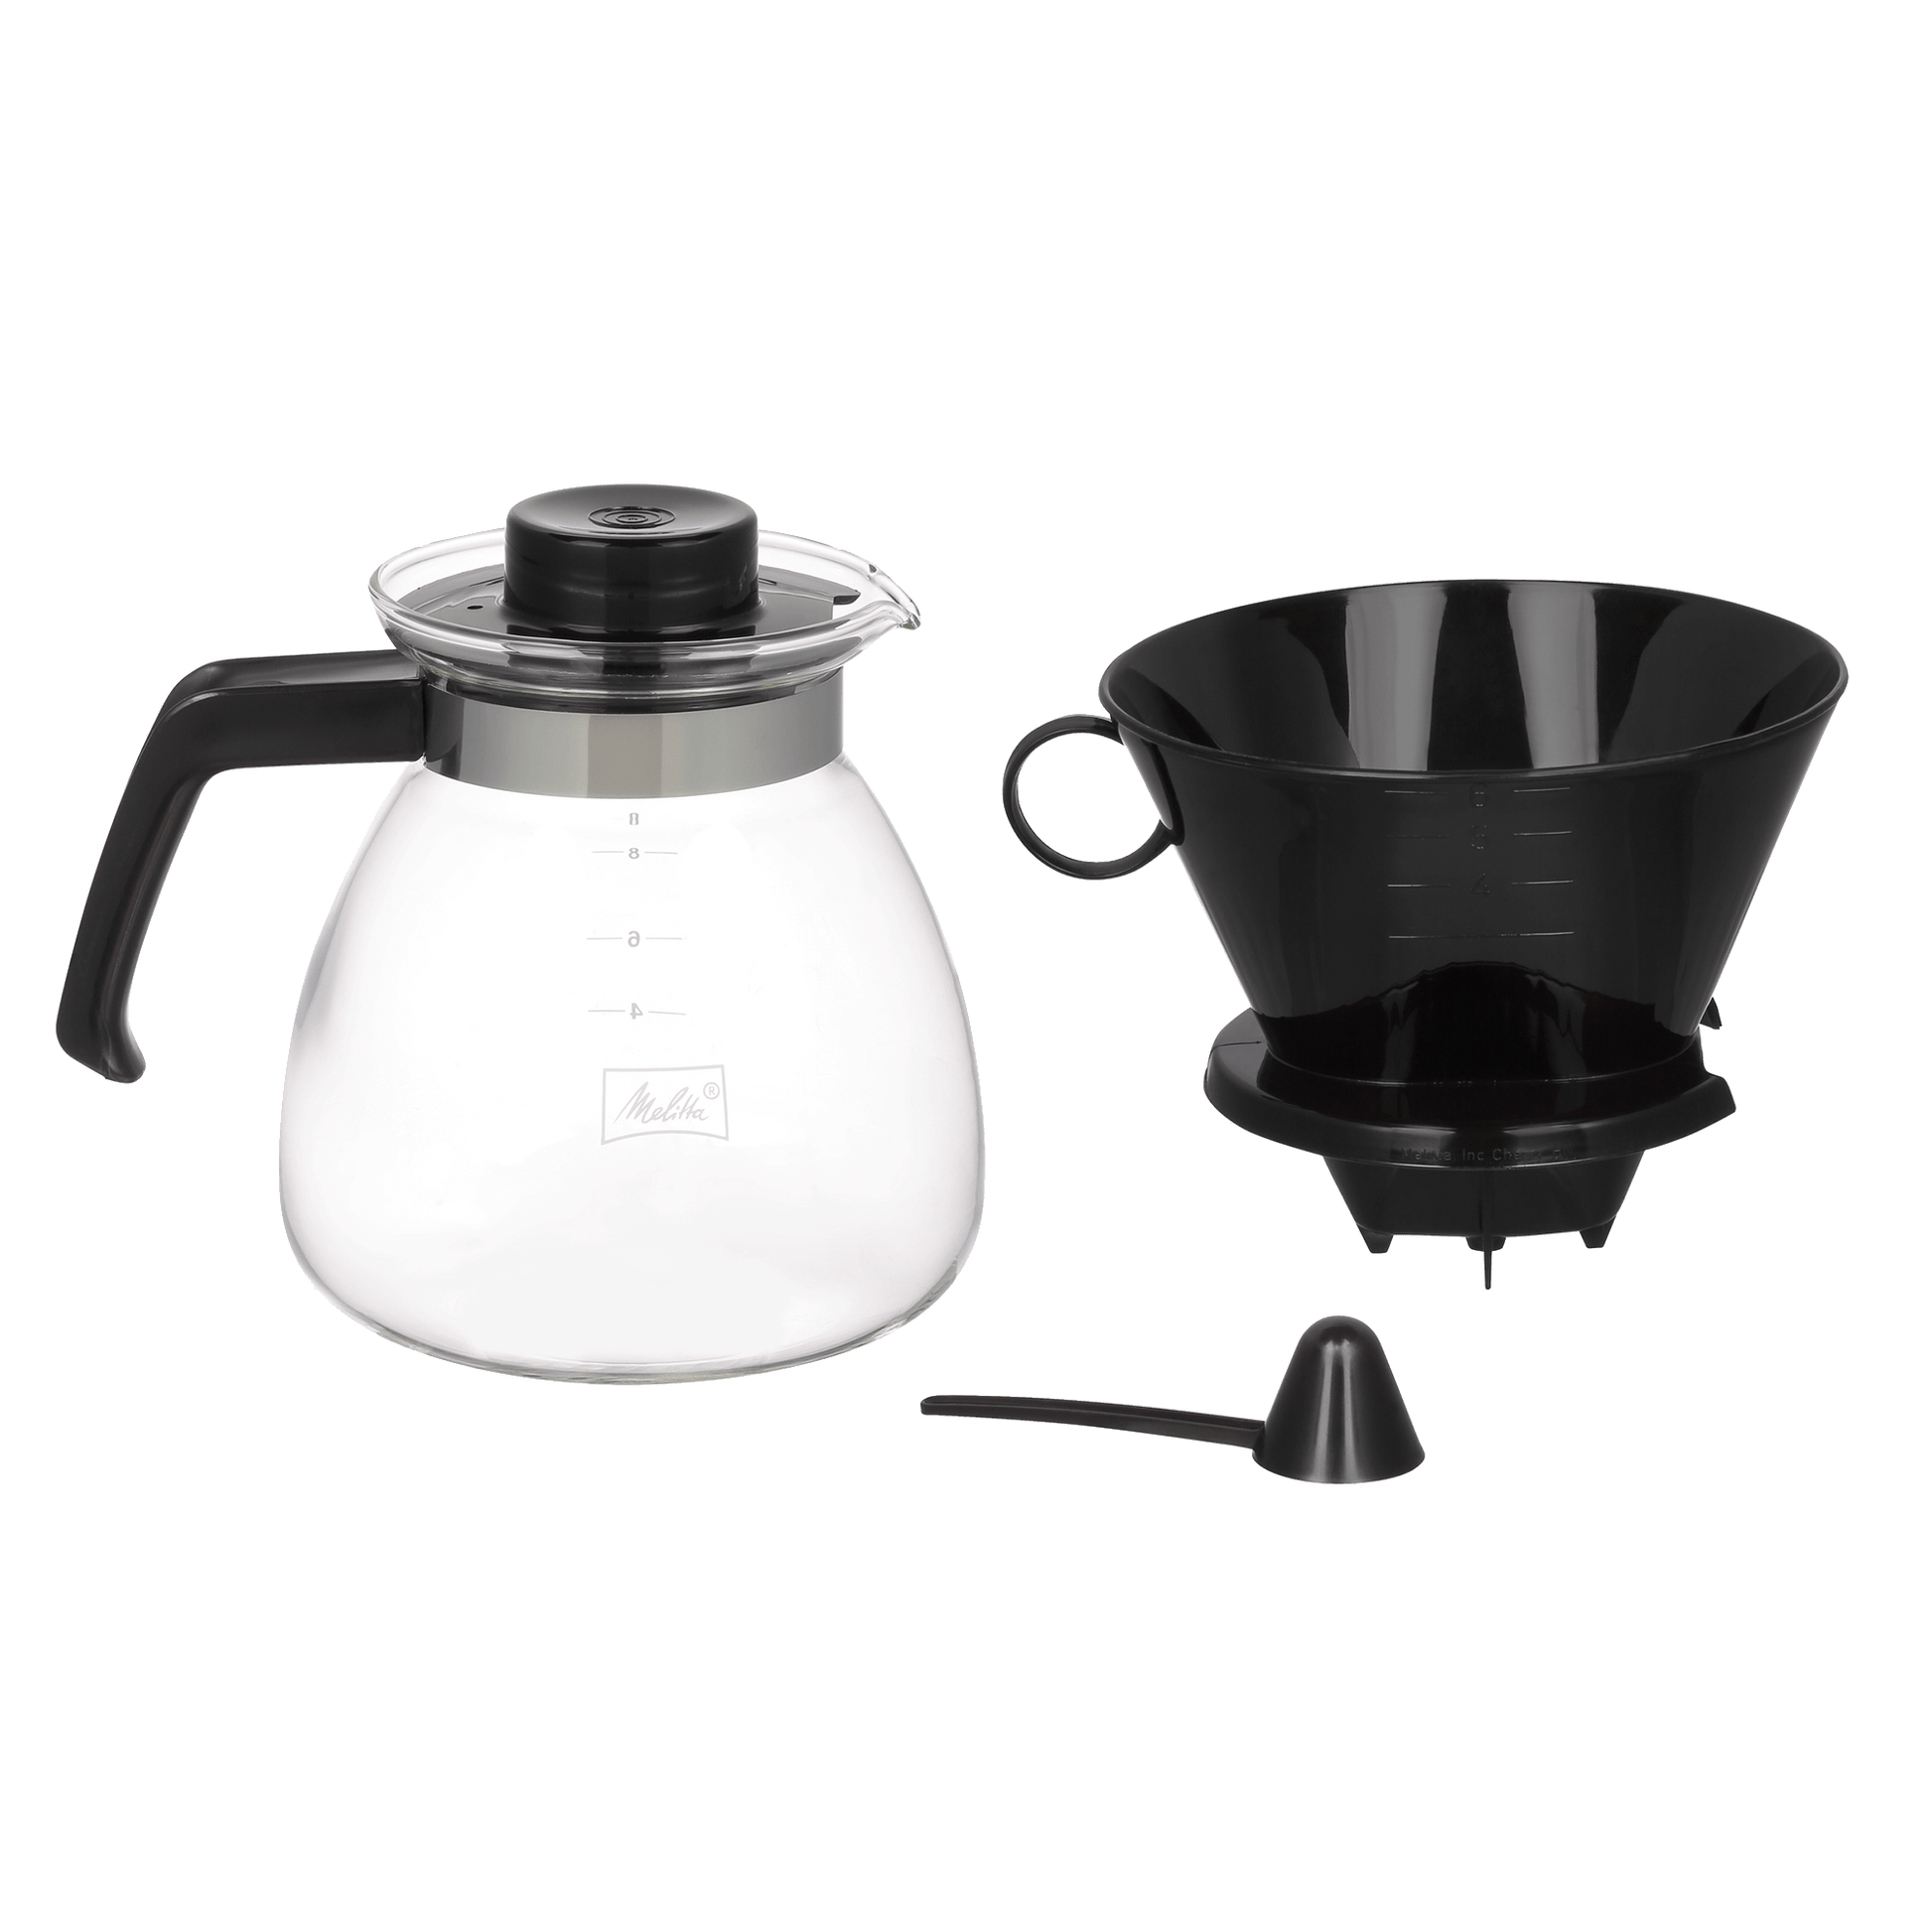 Melitta Stainless Steel Kettle for Pour Over Coffee